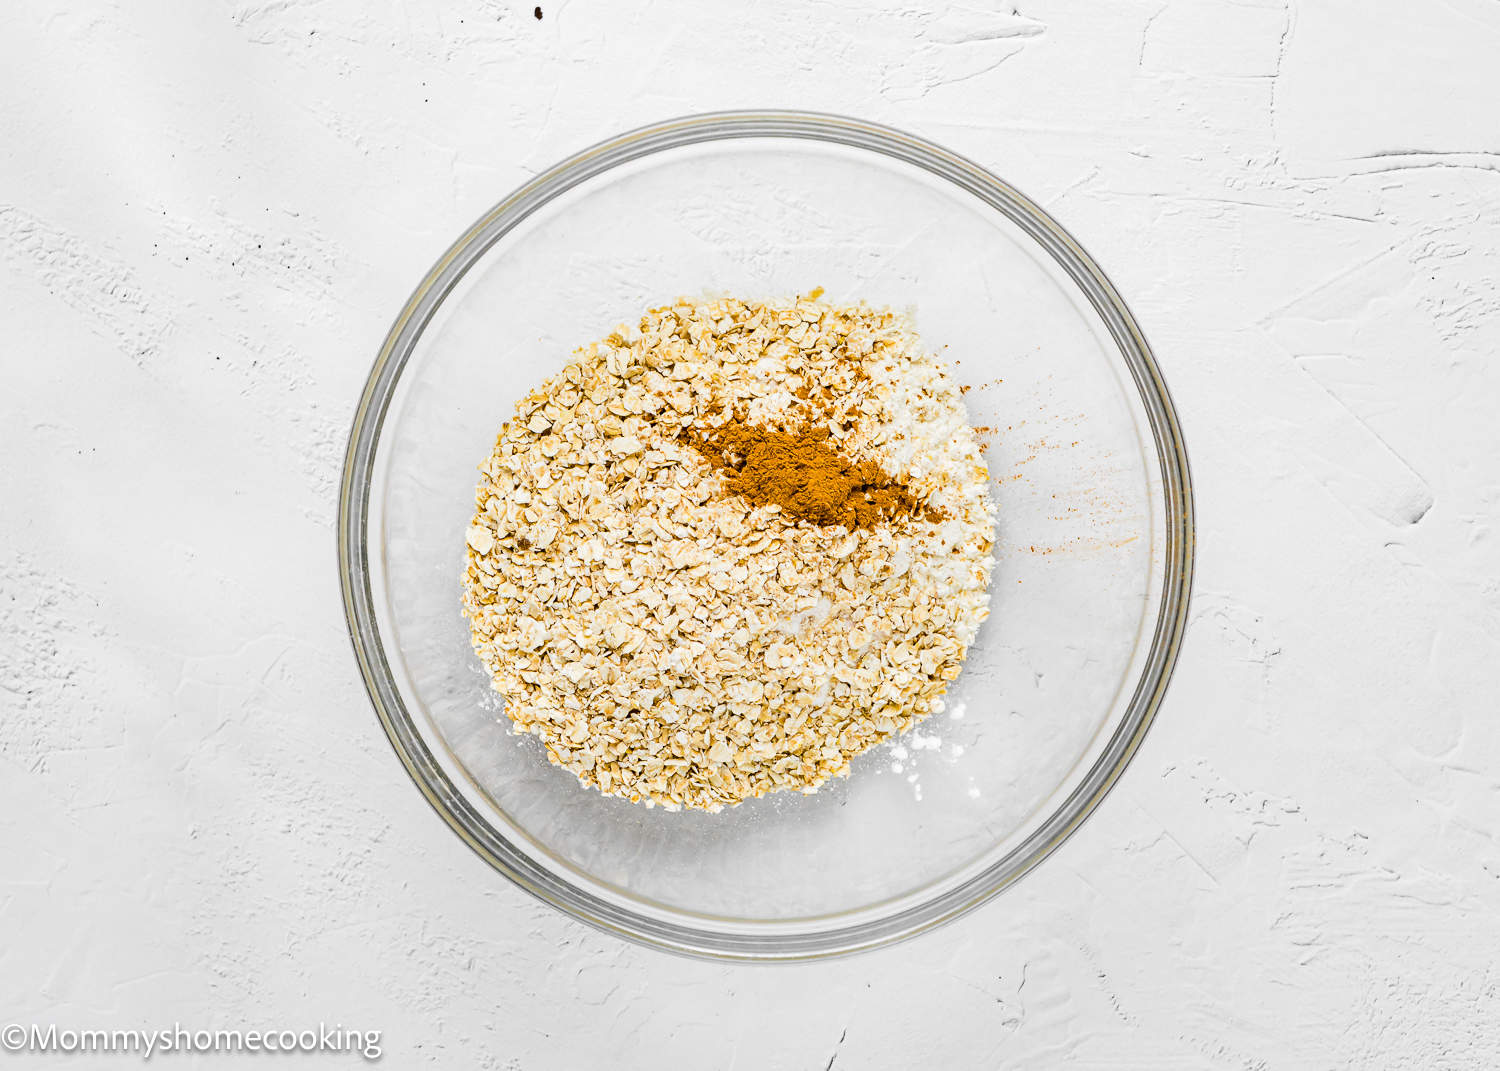 Healthy oats, flour, and aromatic cinnamon in a glass bowl to make healthy oat muffins.